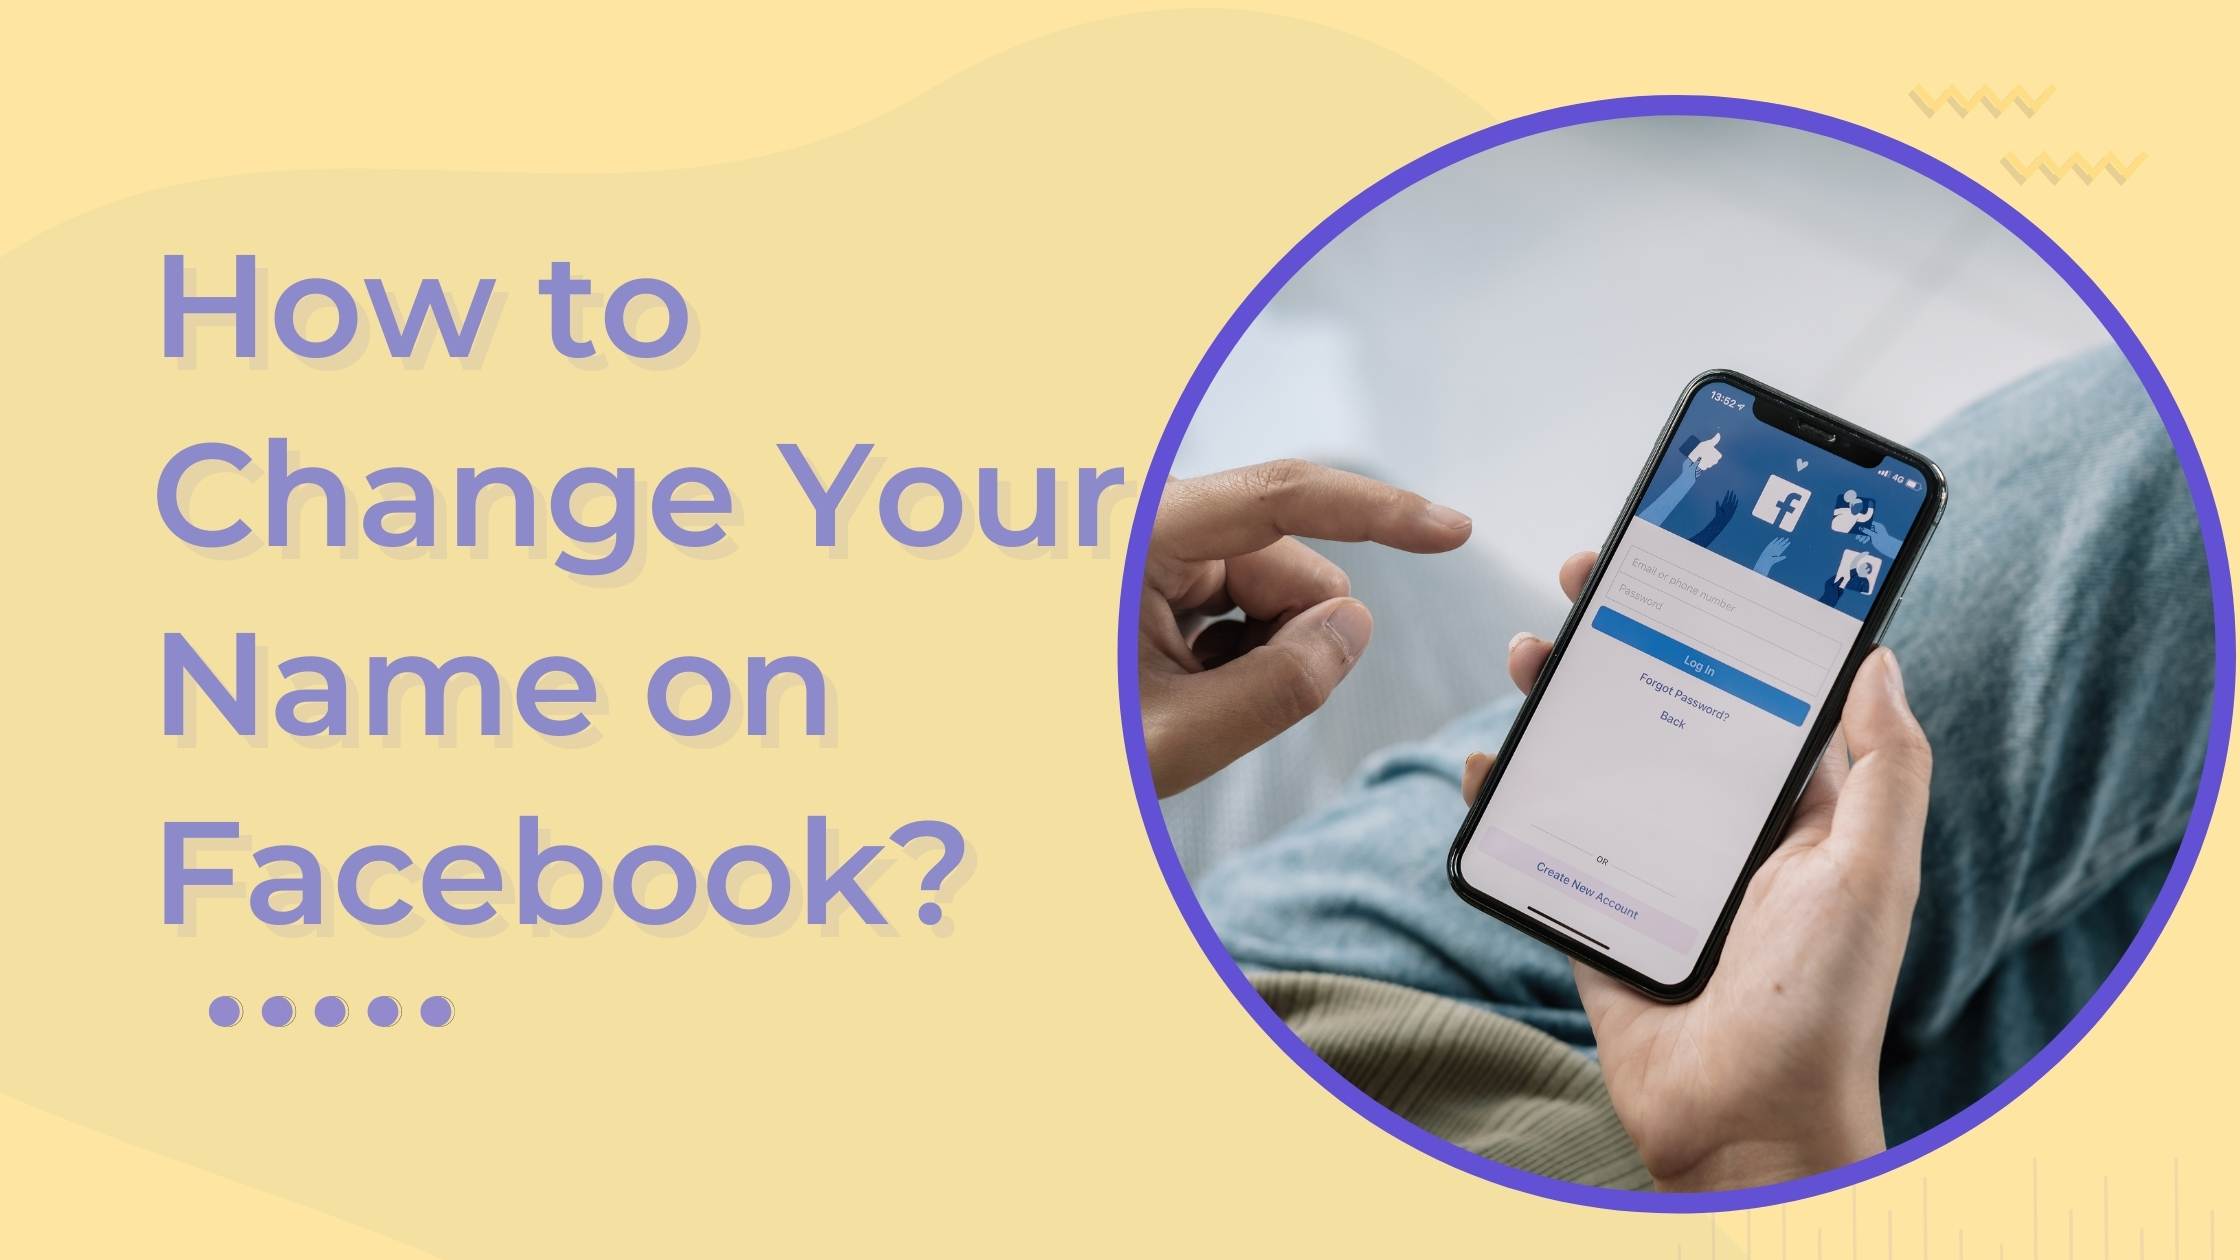 How to Change Your Name on Facebook: A Step-by-Step Guide